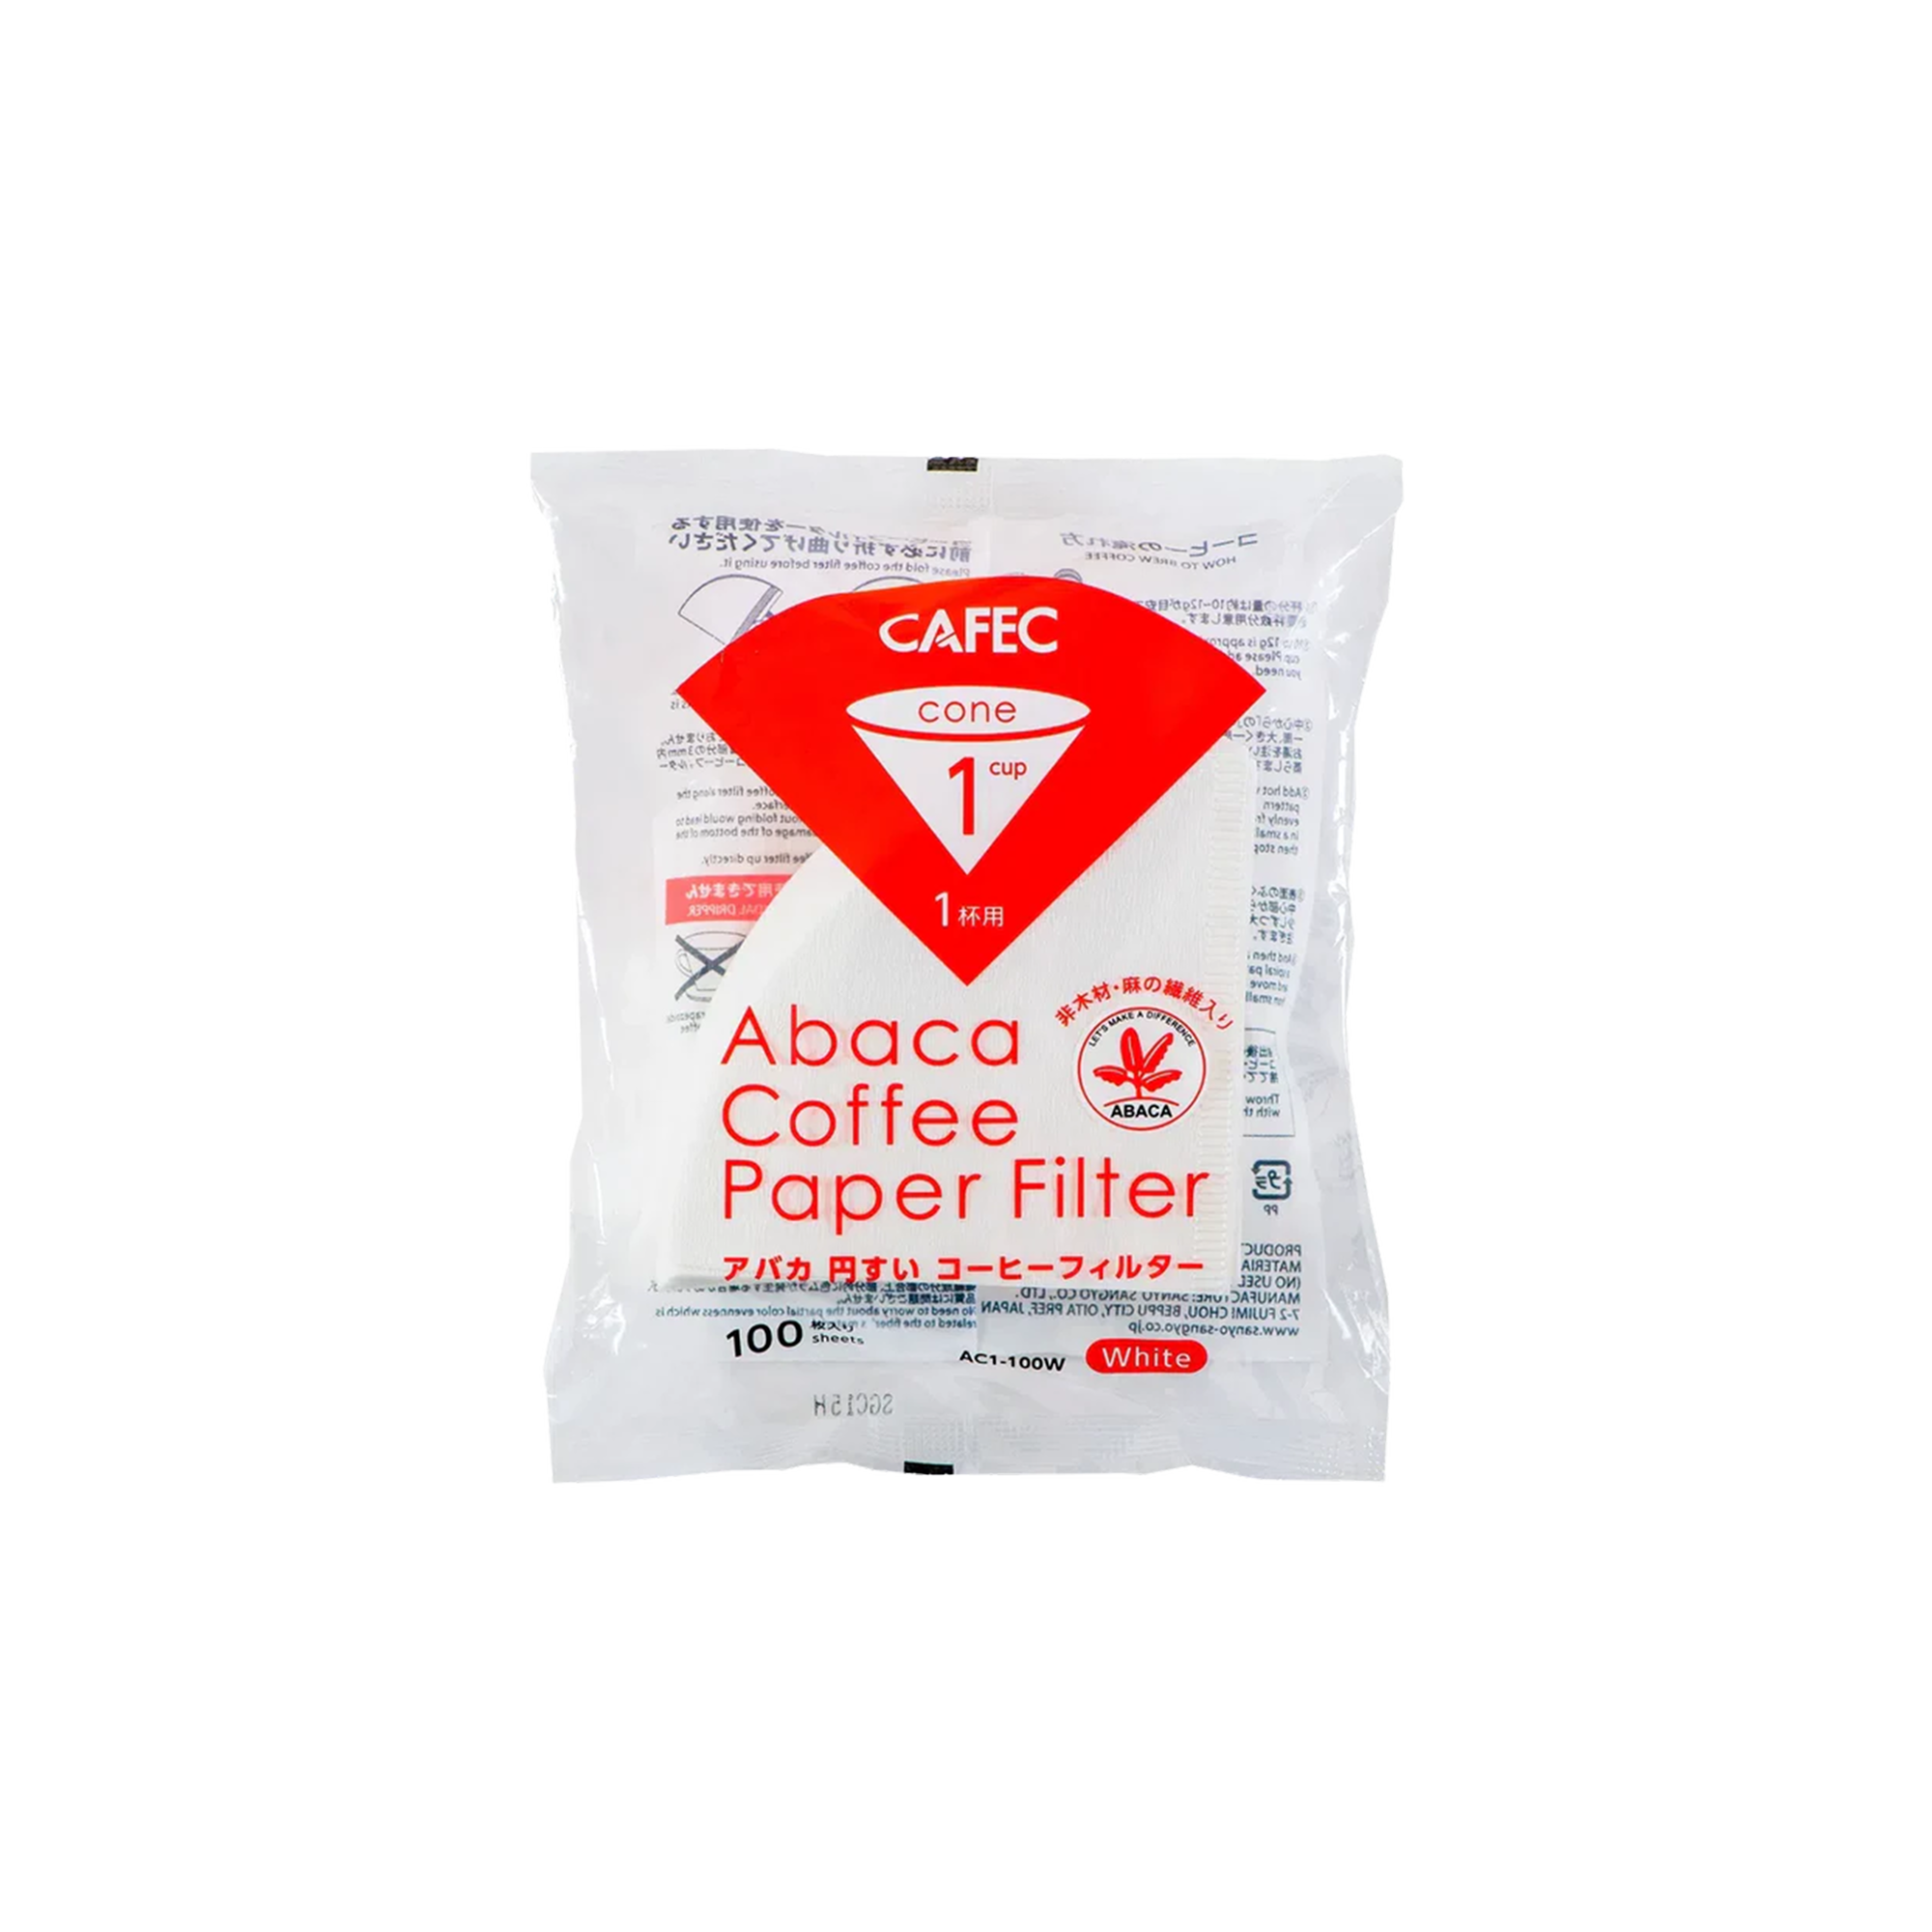 Abaca Paper Filter 1 Cup